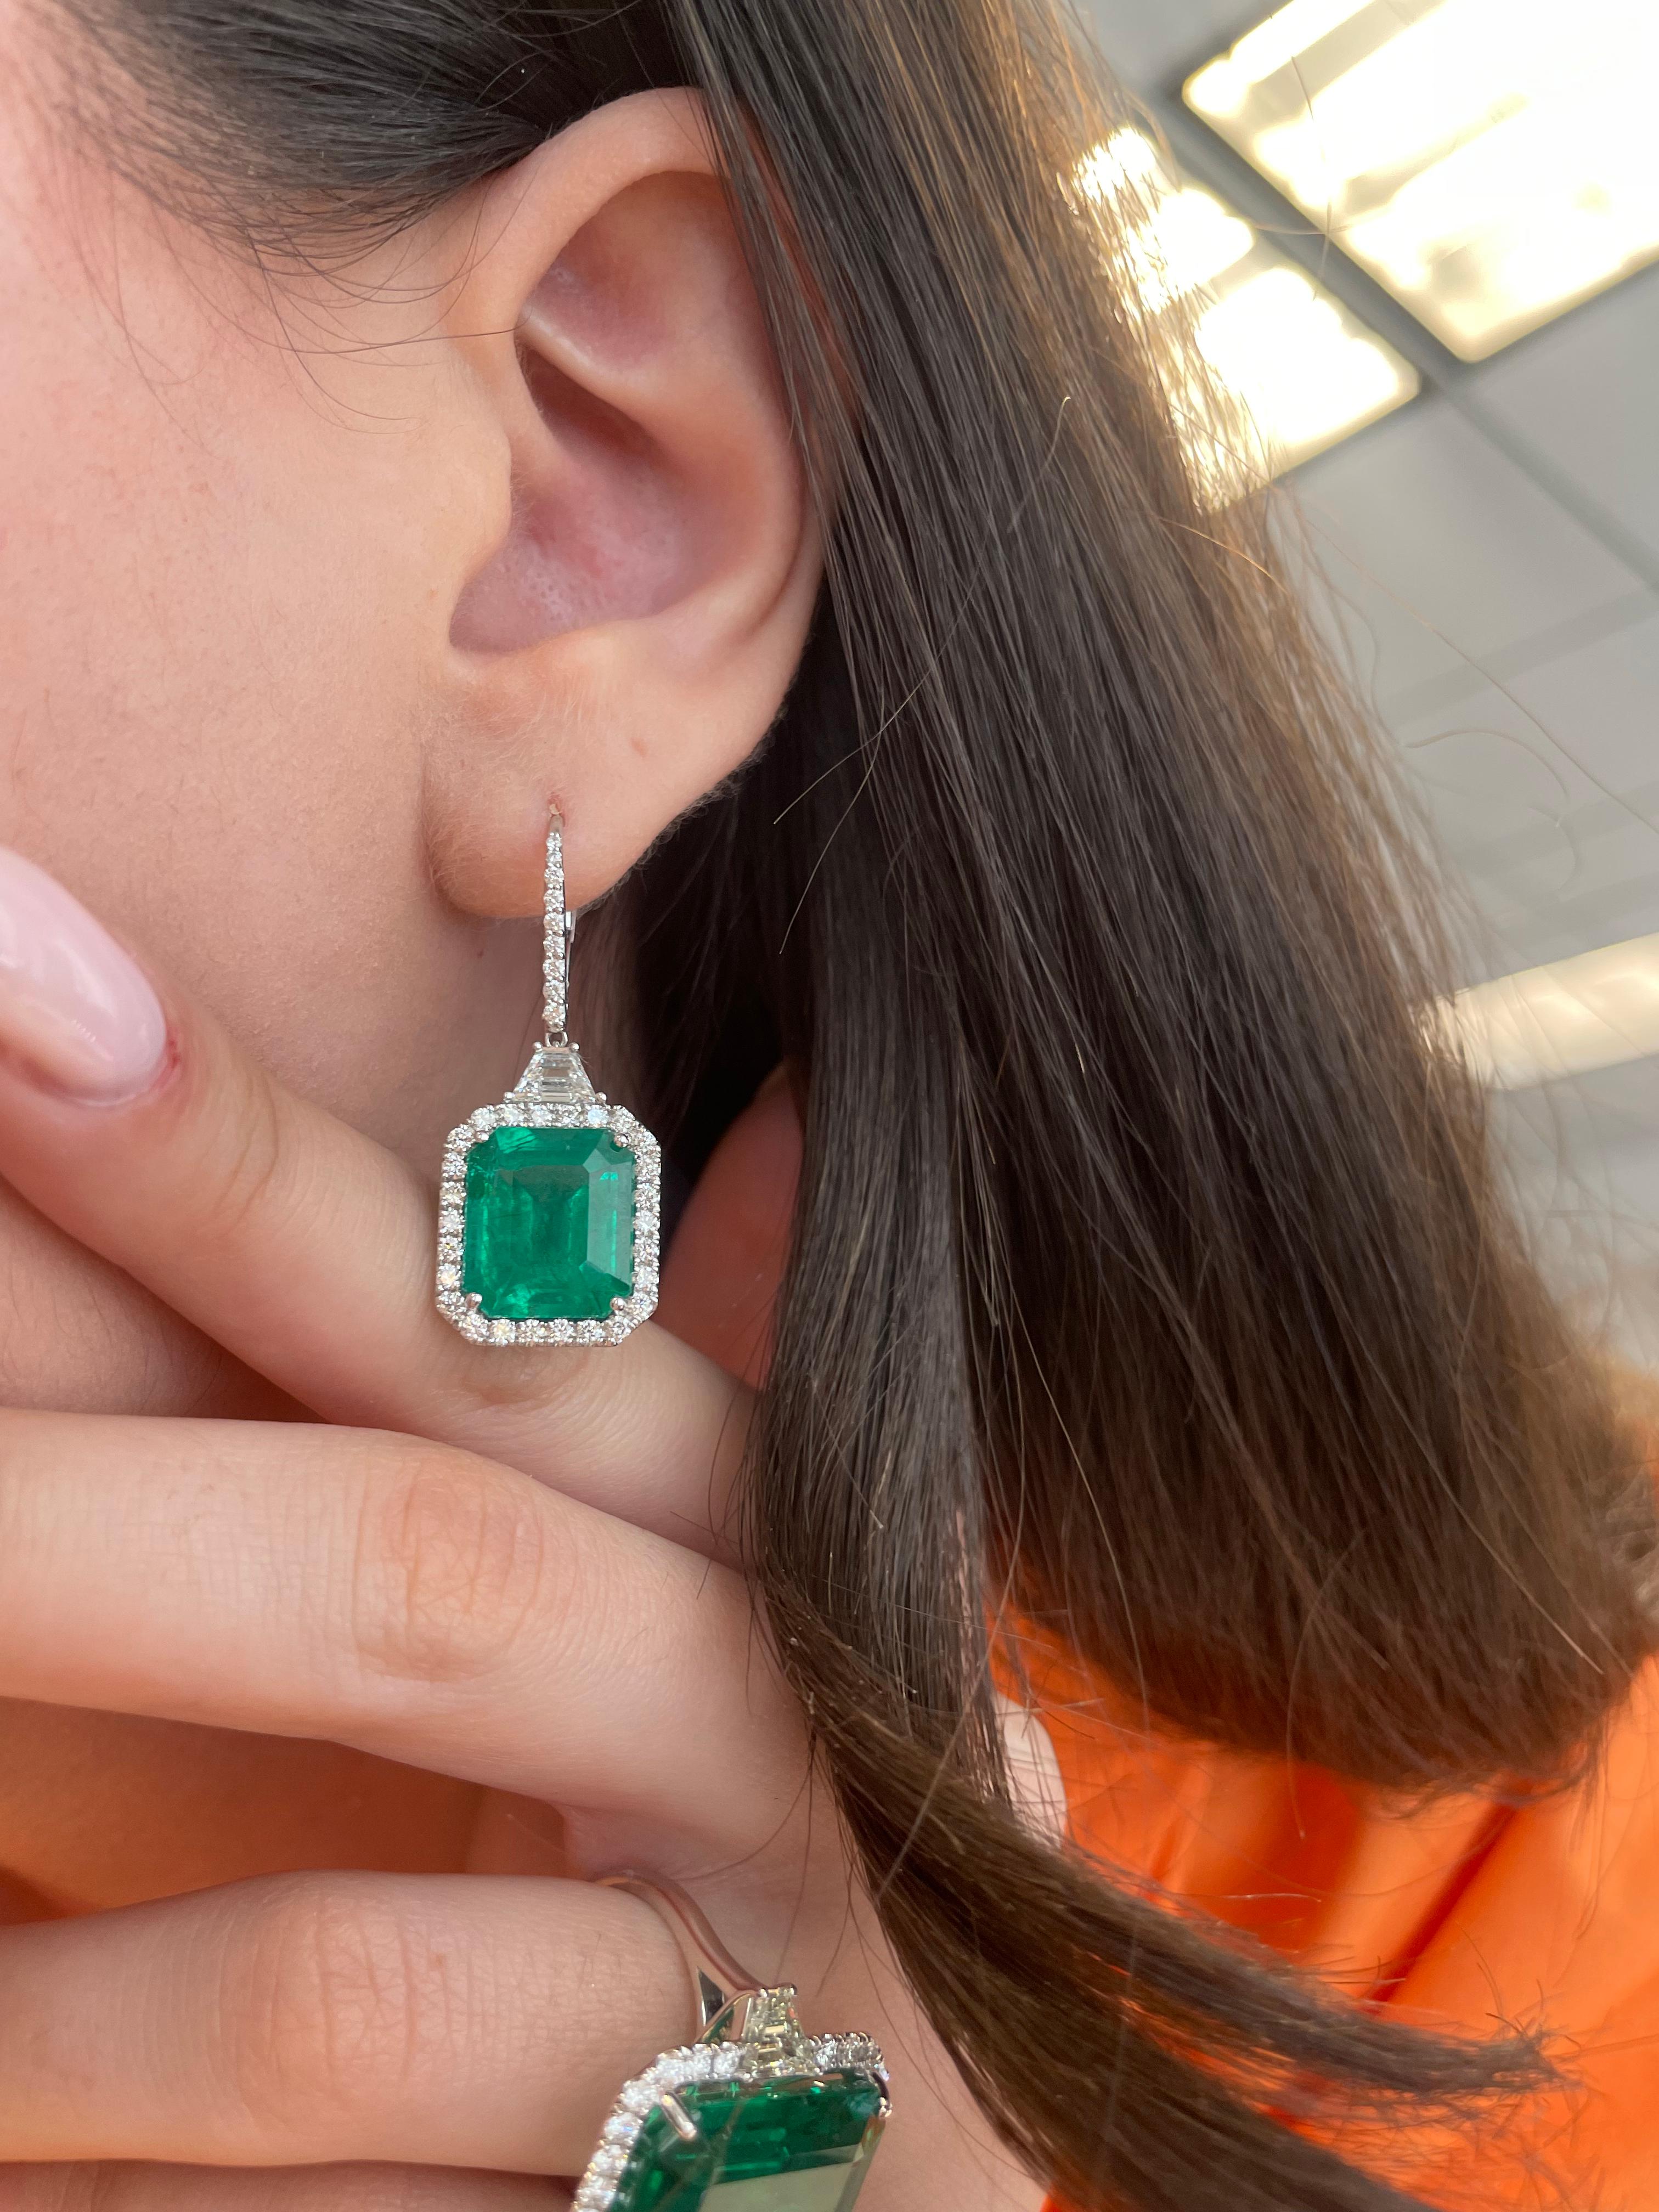 Stunning emeralds and diamond drop earrings, emeralds with superb color and liveliness. GIA & C. Dunaigre certified. High jewelry by Alexander Beverly Hills. 
14.70 carats total gemstone weight.
2 square emerald cut emeralds, 13.08 carats total,